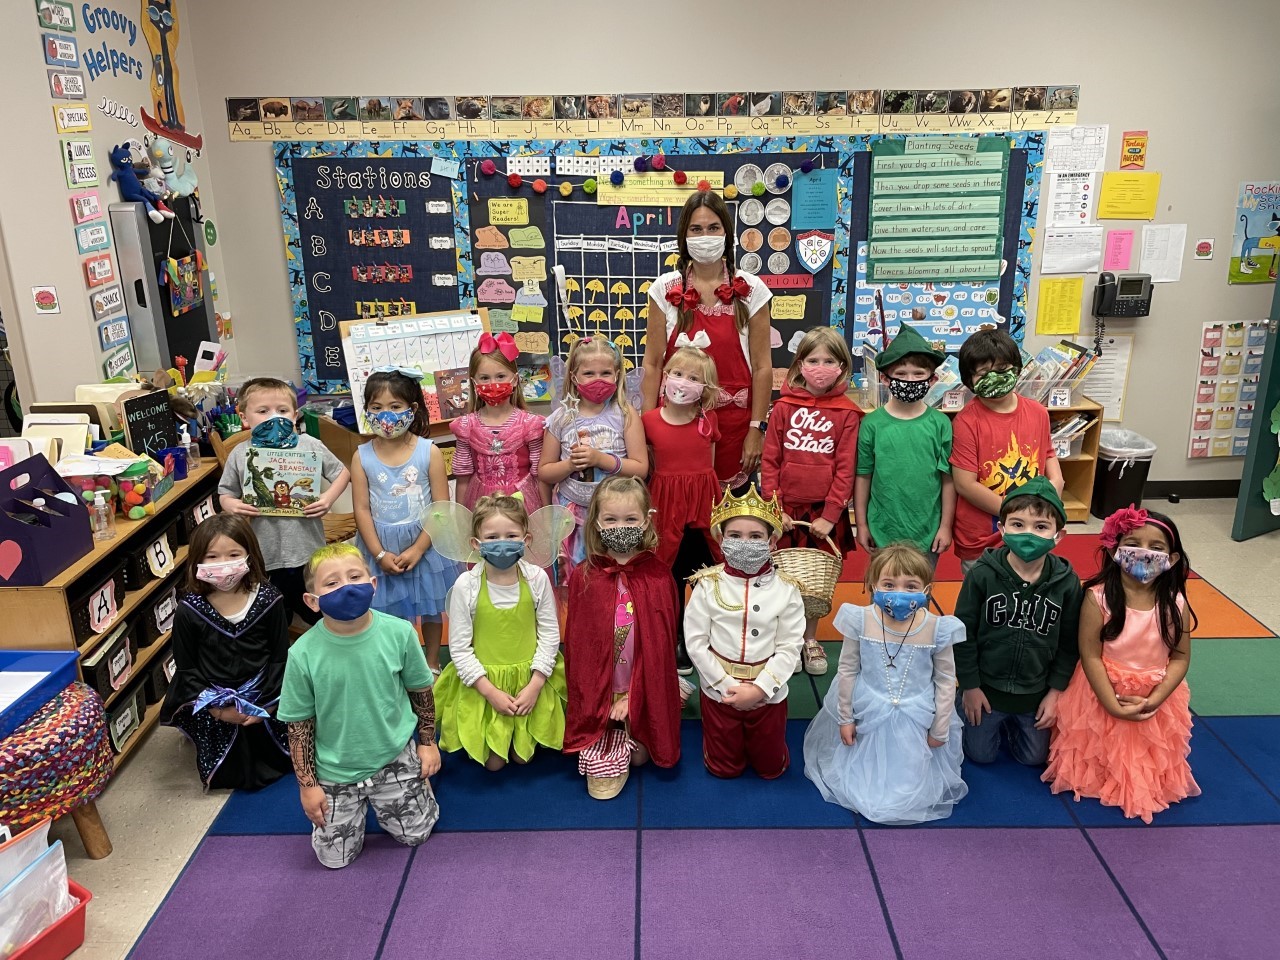 "A group of students smile for a picture while wearing fairy tale costumes.